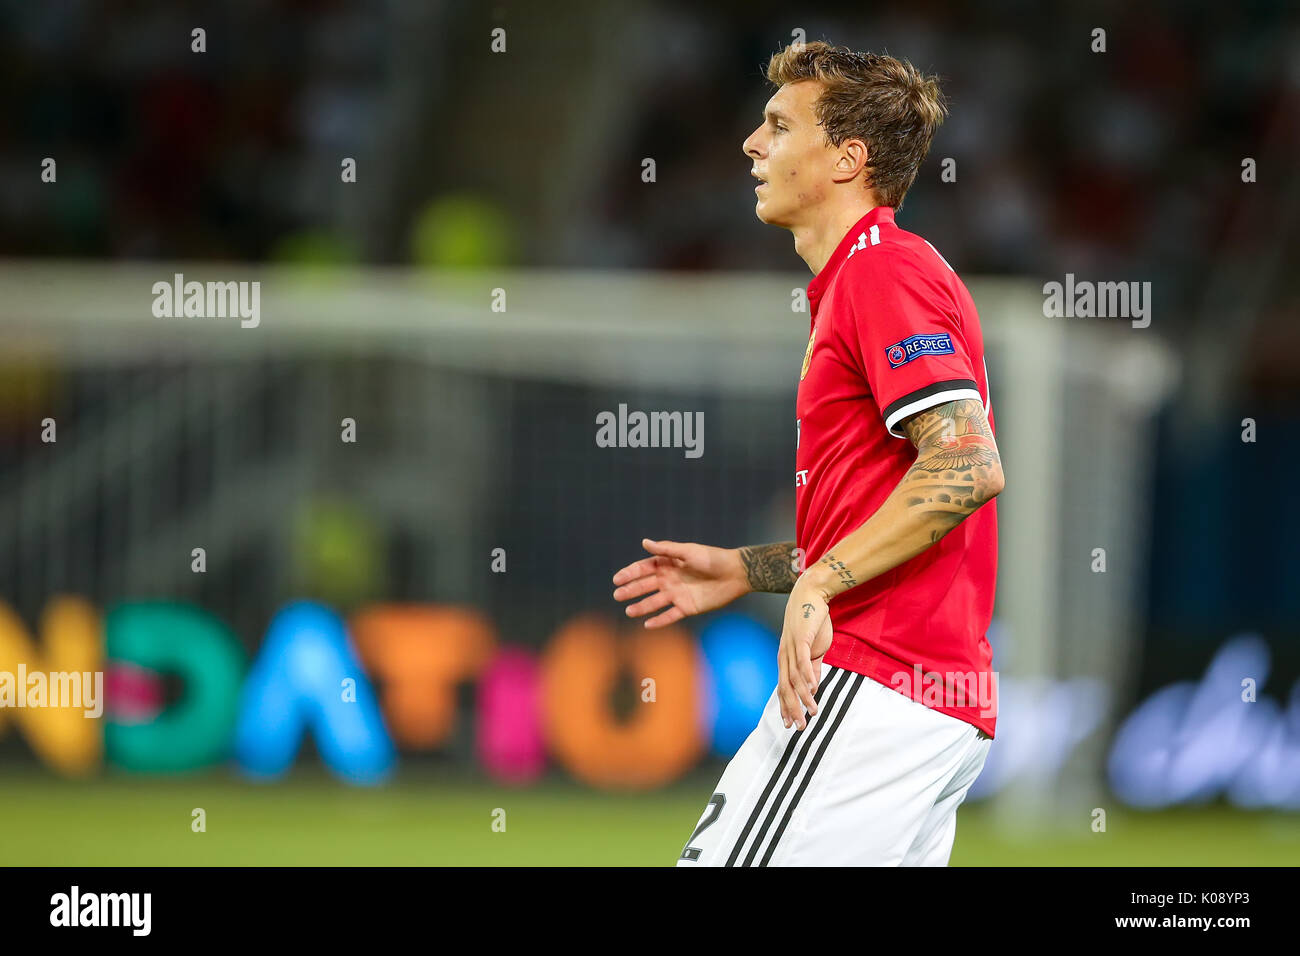 Skopje, FYROM - August 8,2017: Manchester United Victor Lindelof during the UEFA Super Cup Final match between Real Madrid and Manchester United at Ph Stock Photo